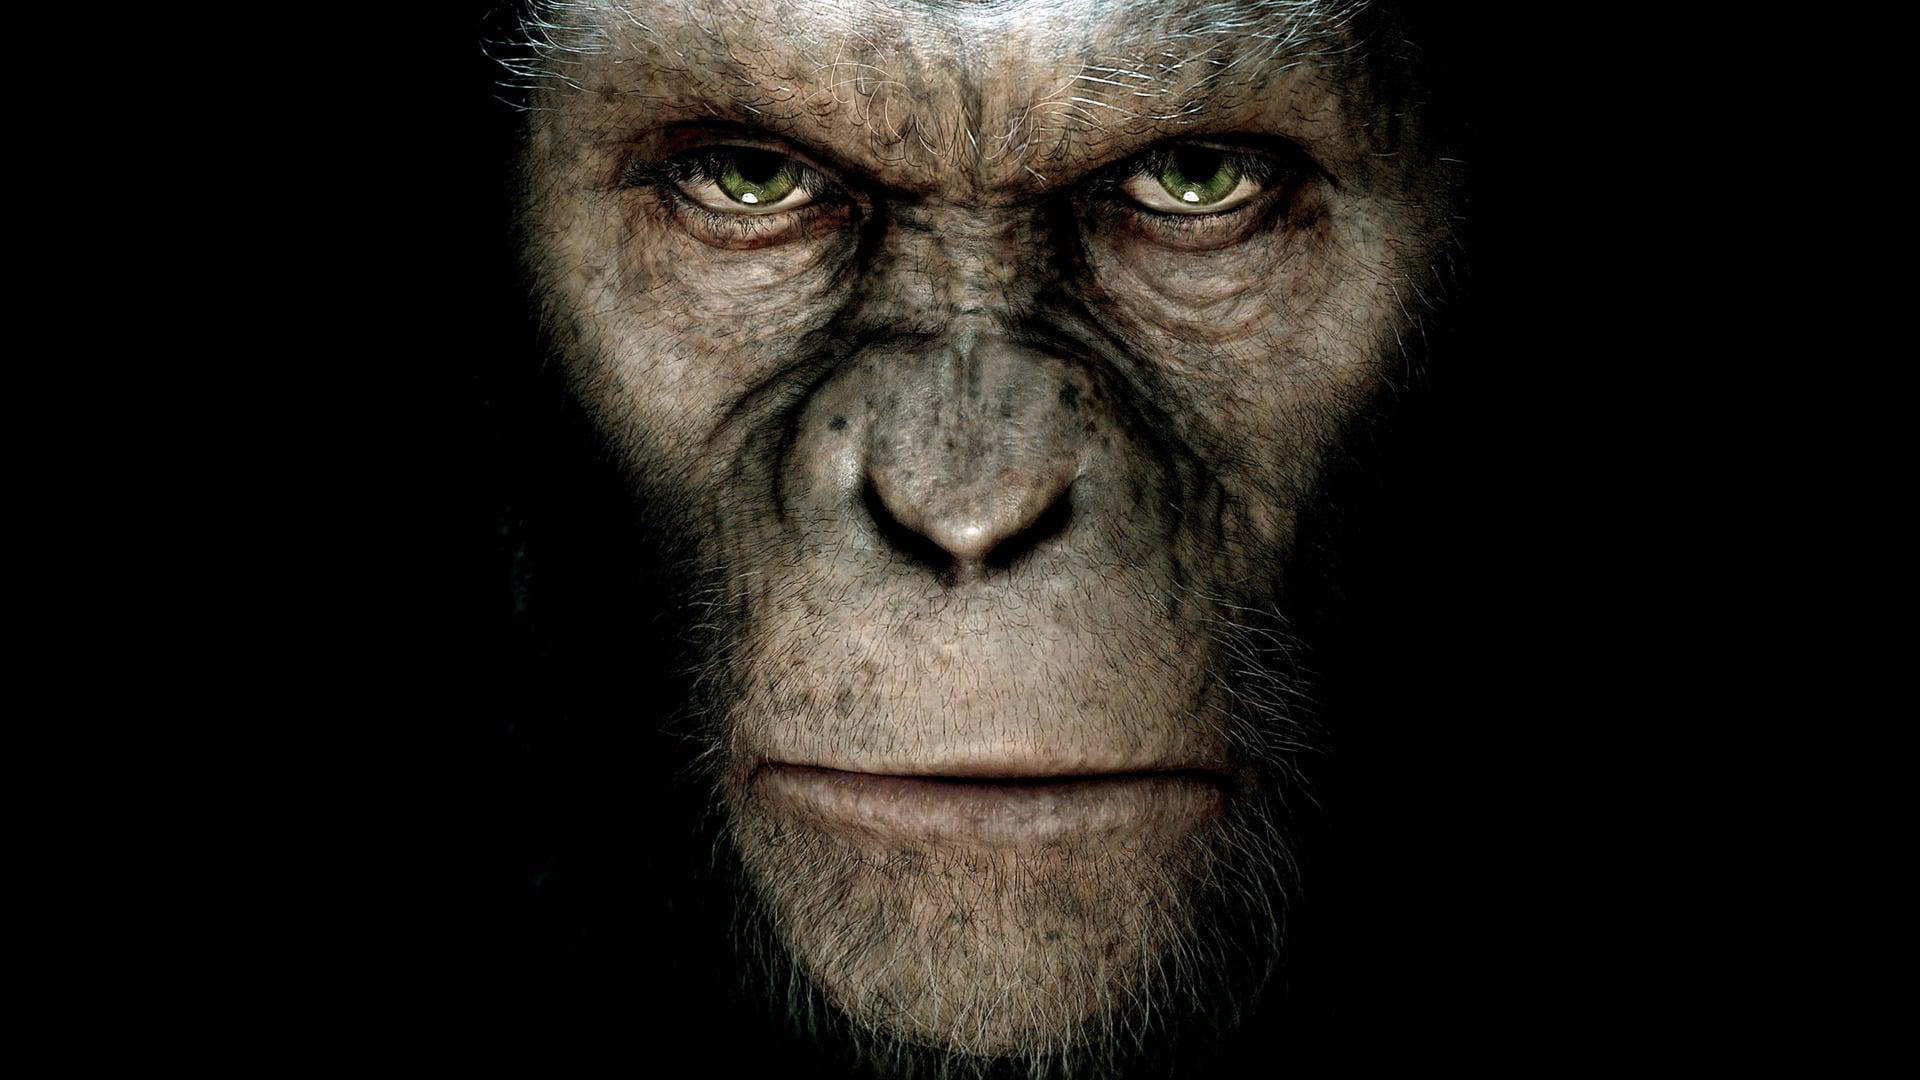 Backdrop Image for Rise of the Planet of the Apes